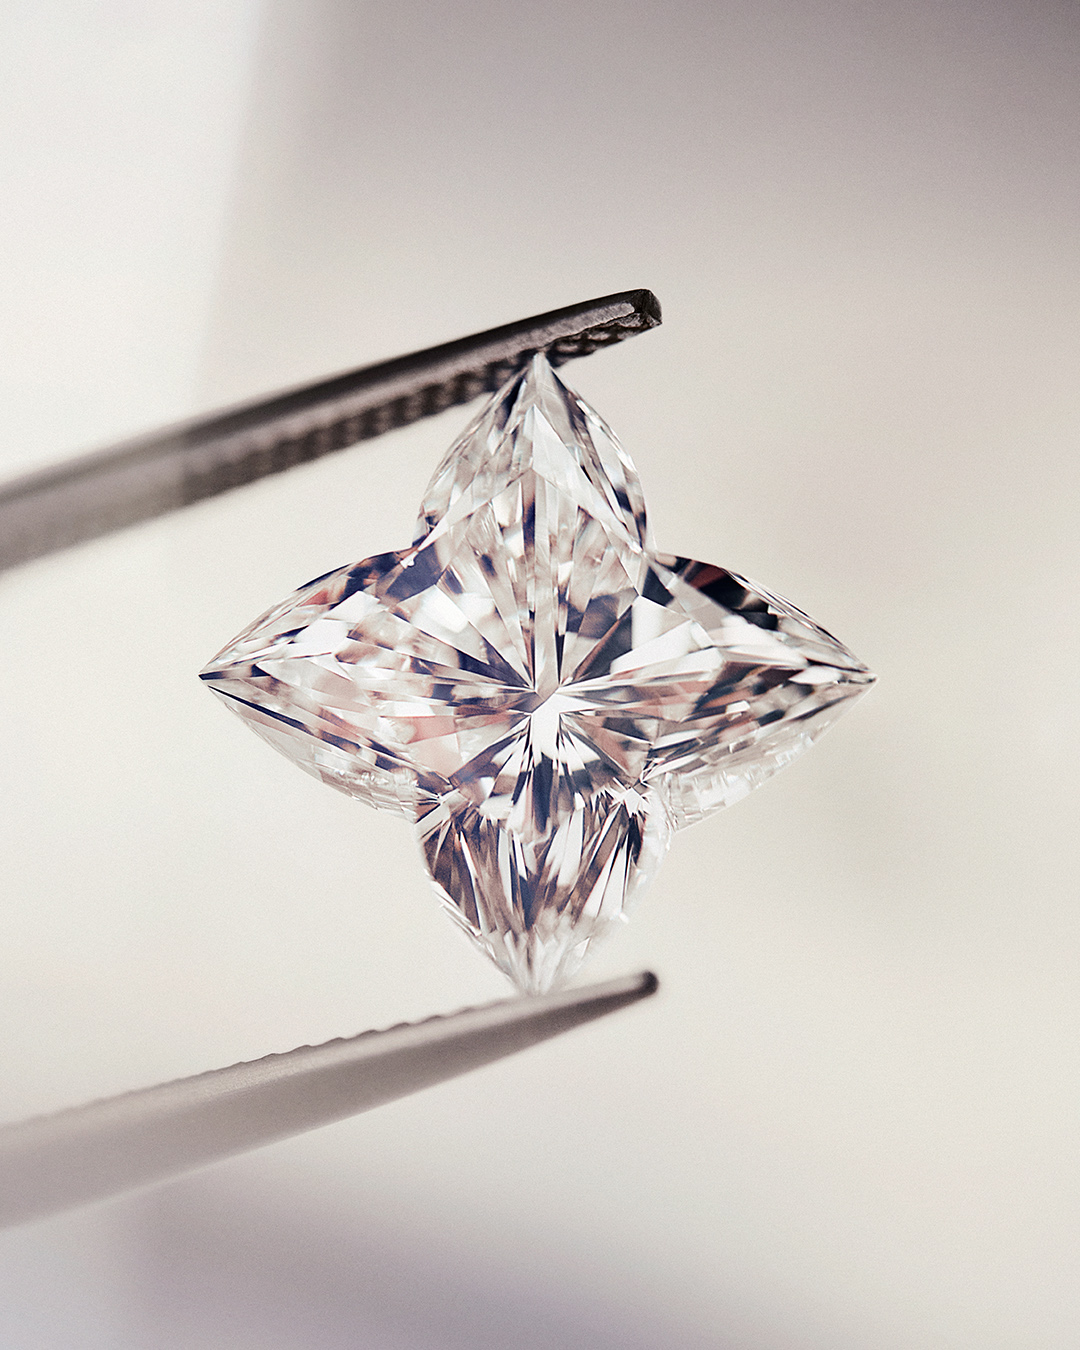 Louis Vuitton on X: A unique feat. With the LV Diamonds Collection,  #LouisVuitton showcases the LV Monogram Star diamond cut that recreates the  Maison's iconic flower with precision. Explore the new #LVFineJewelry